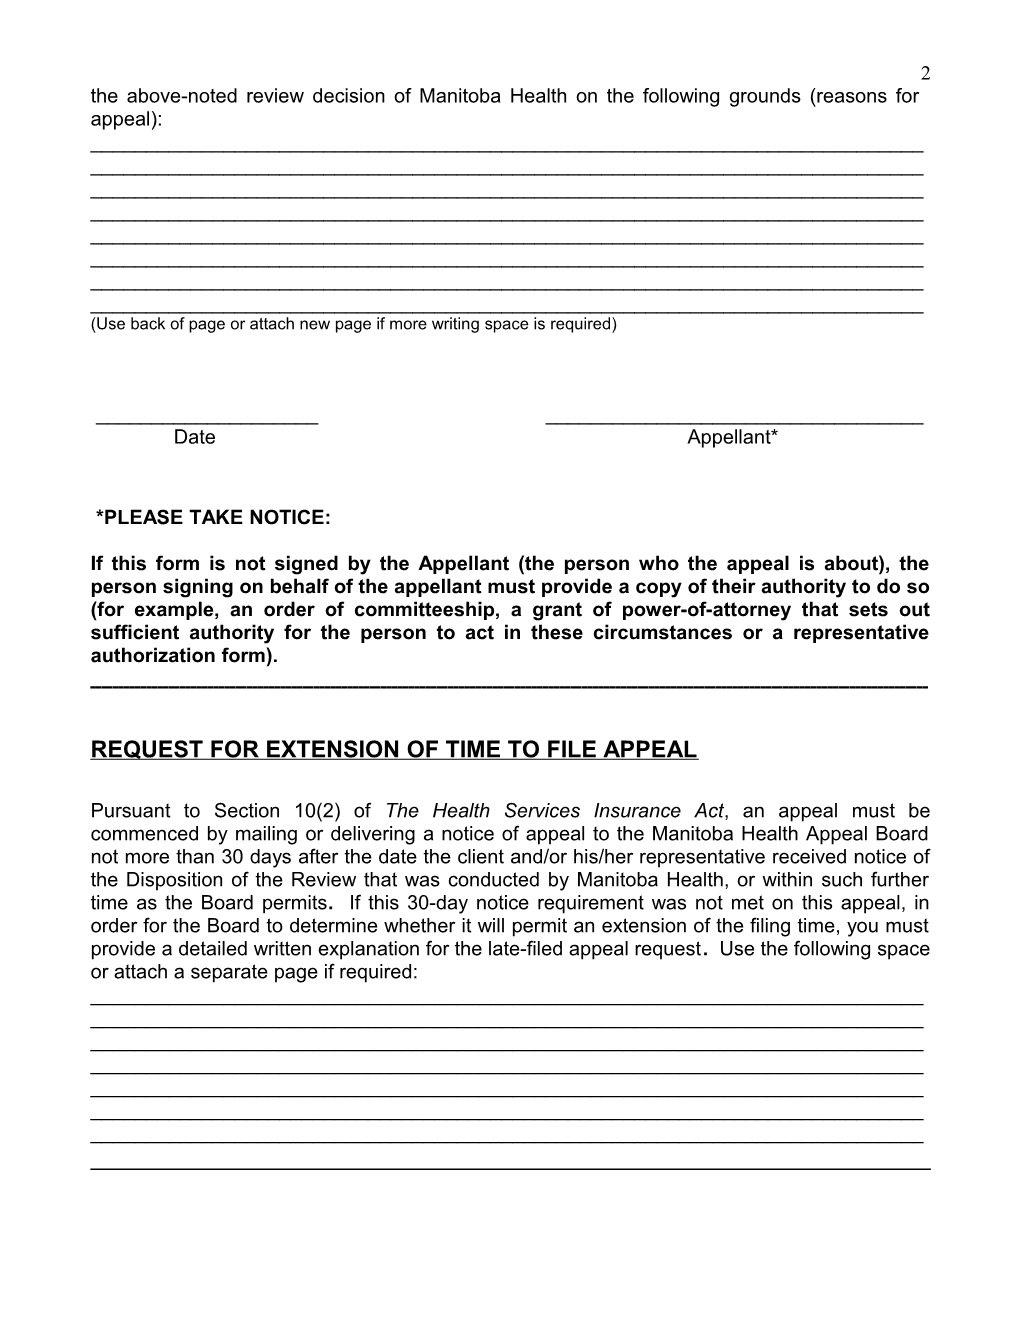 Notice of Appeal of the Appeal Panel for Home Care